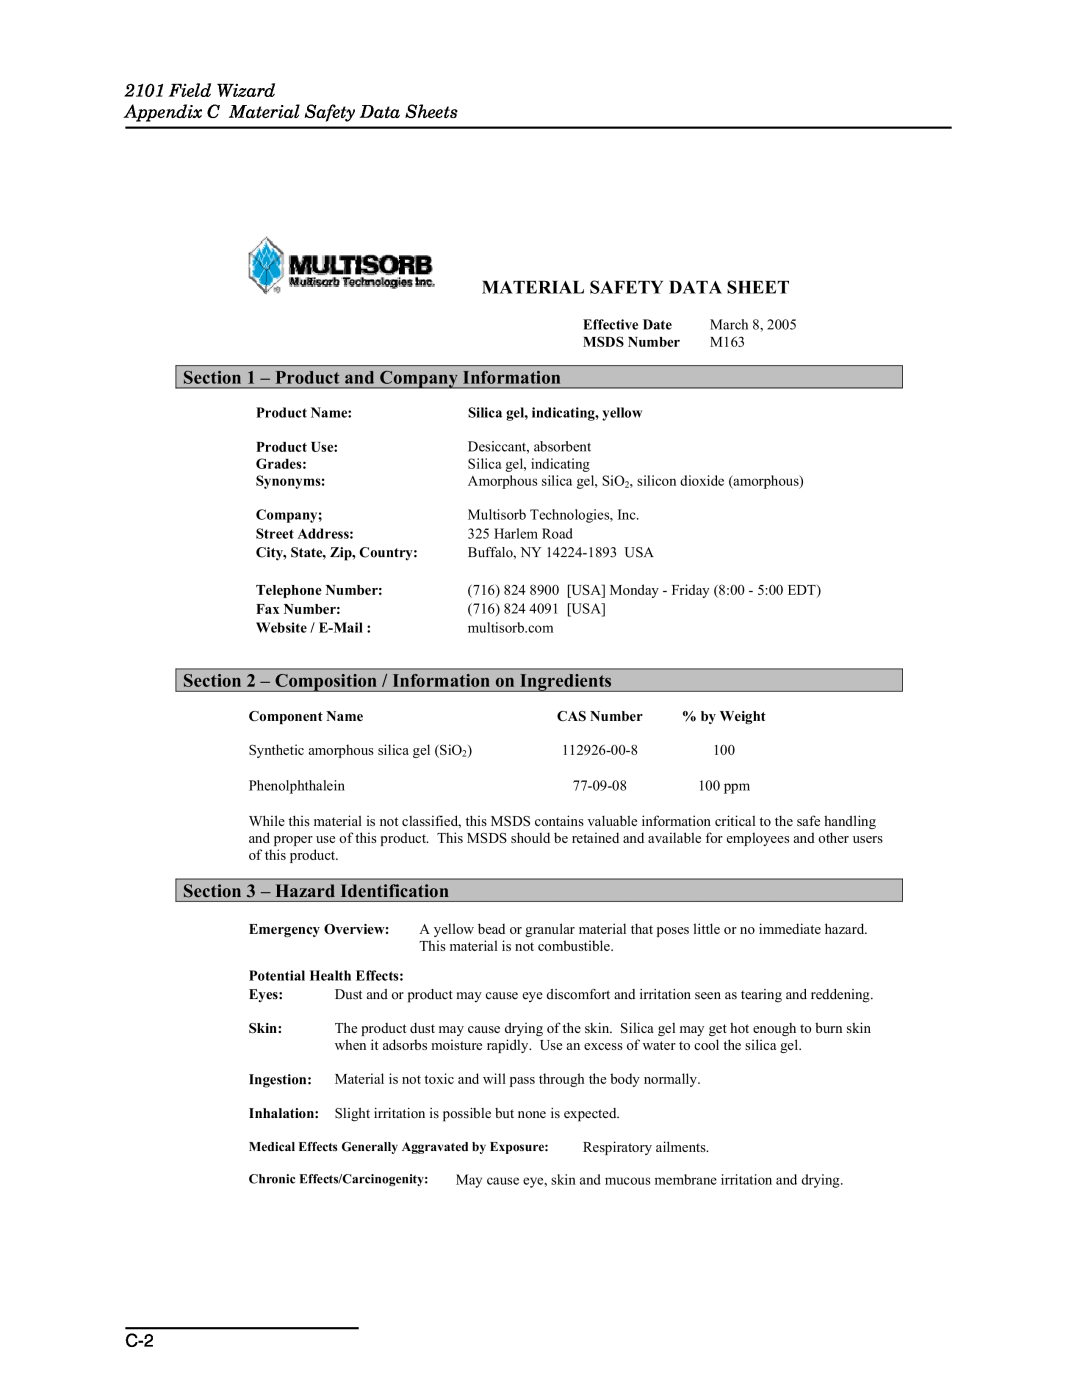 Teledyne 2101 Material Safety Data Sheet, Product and Company Information, Composition / Information on Ingredients 